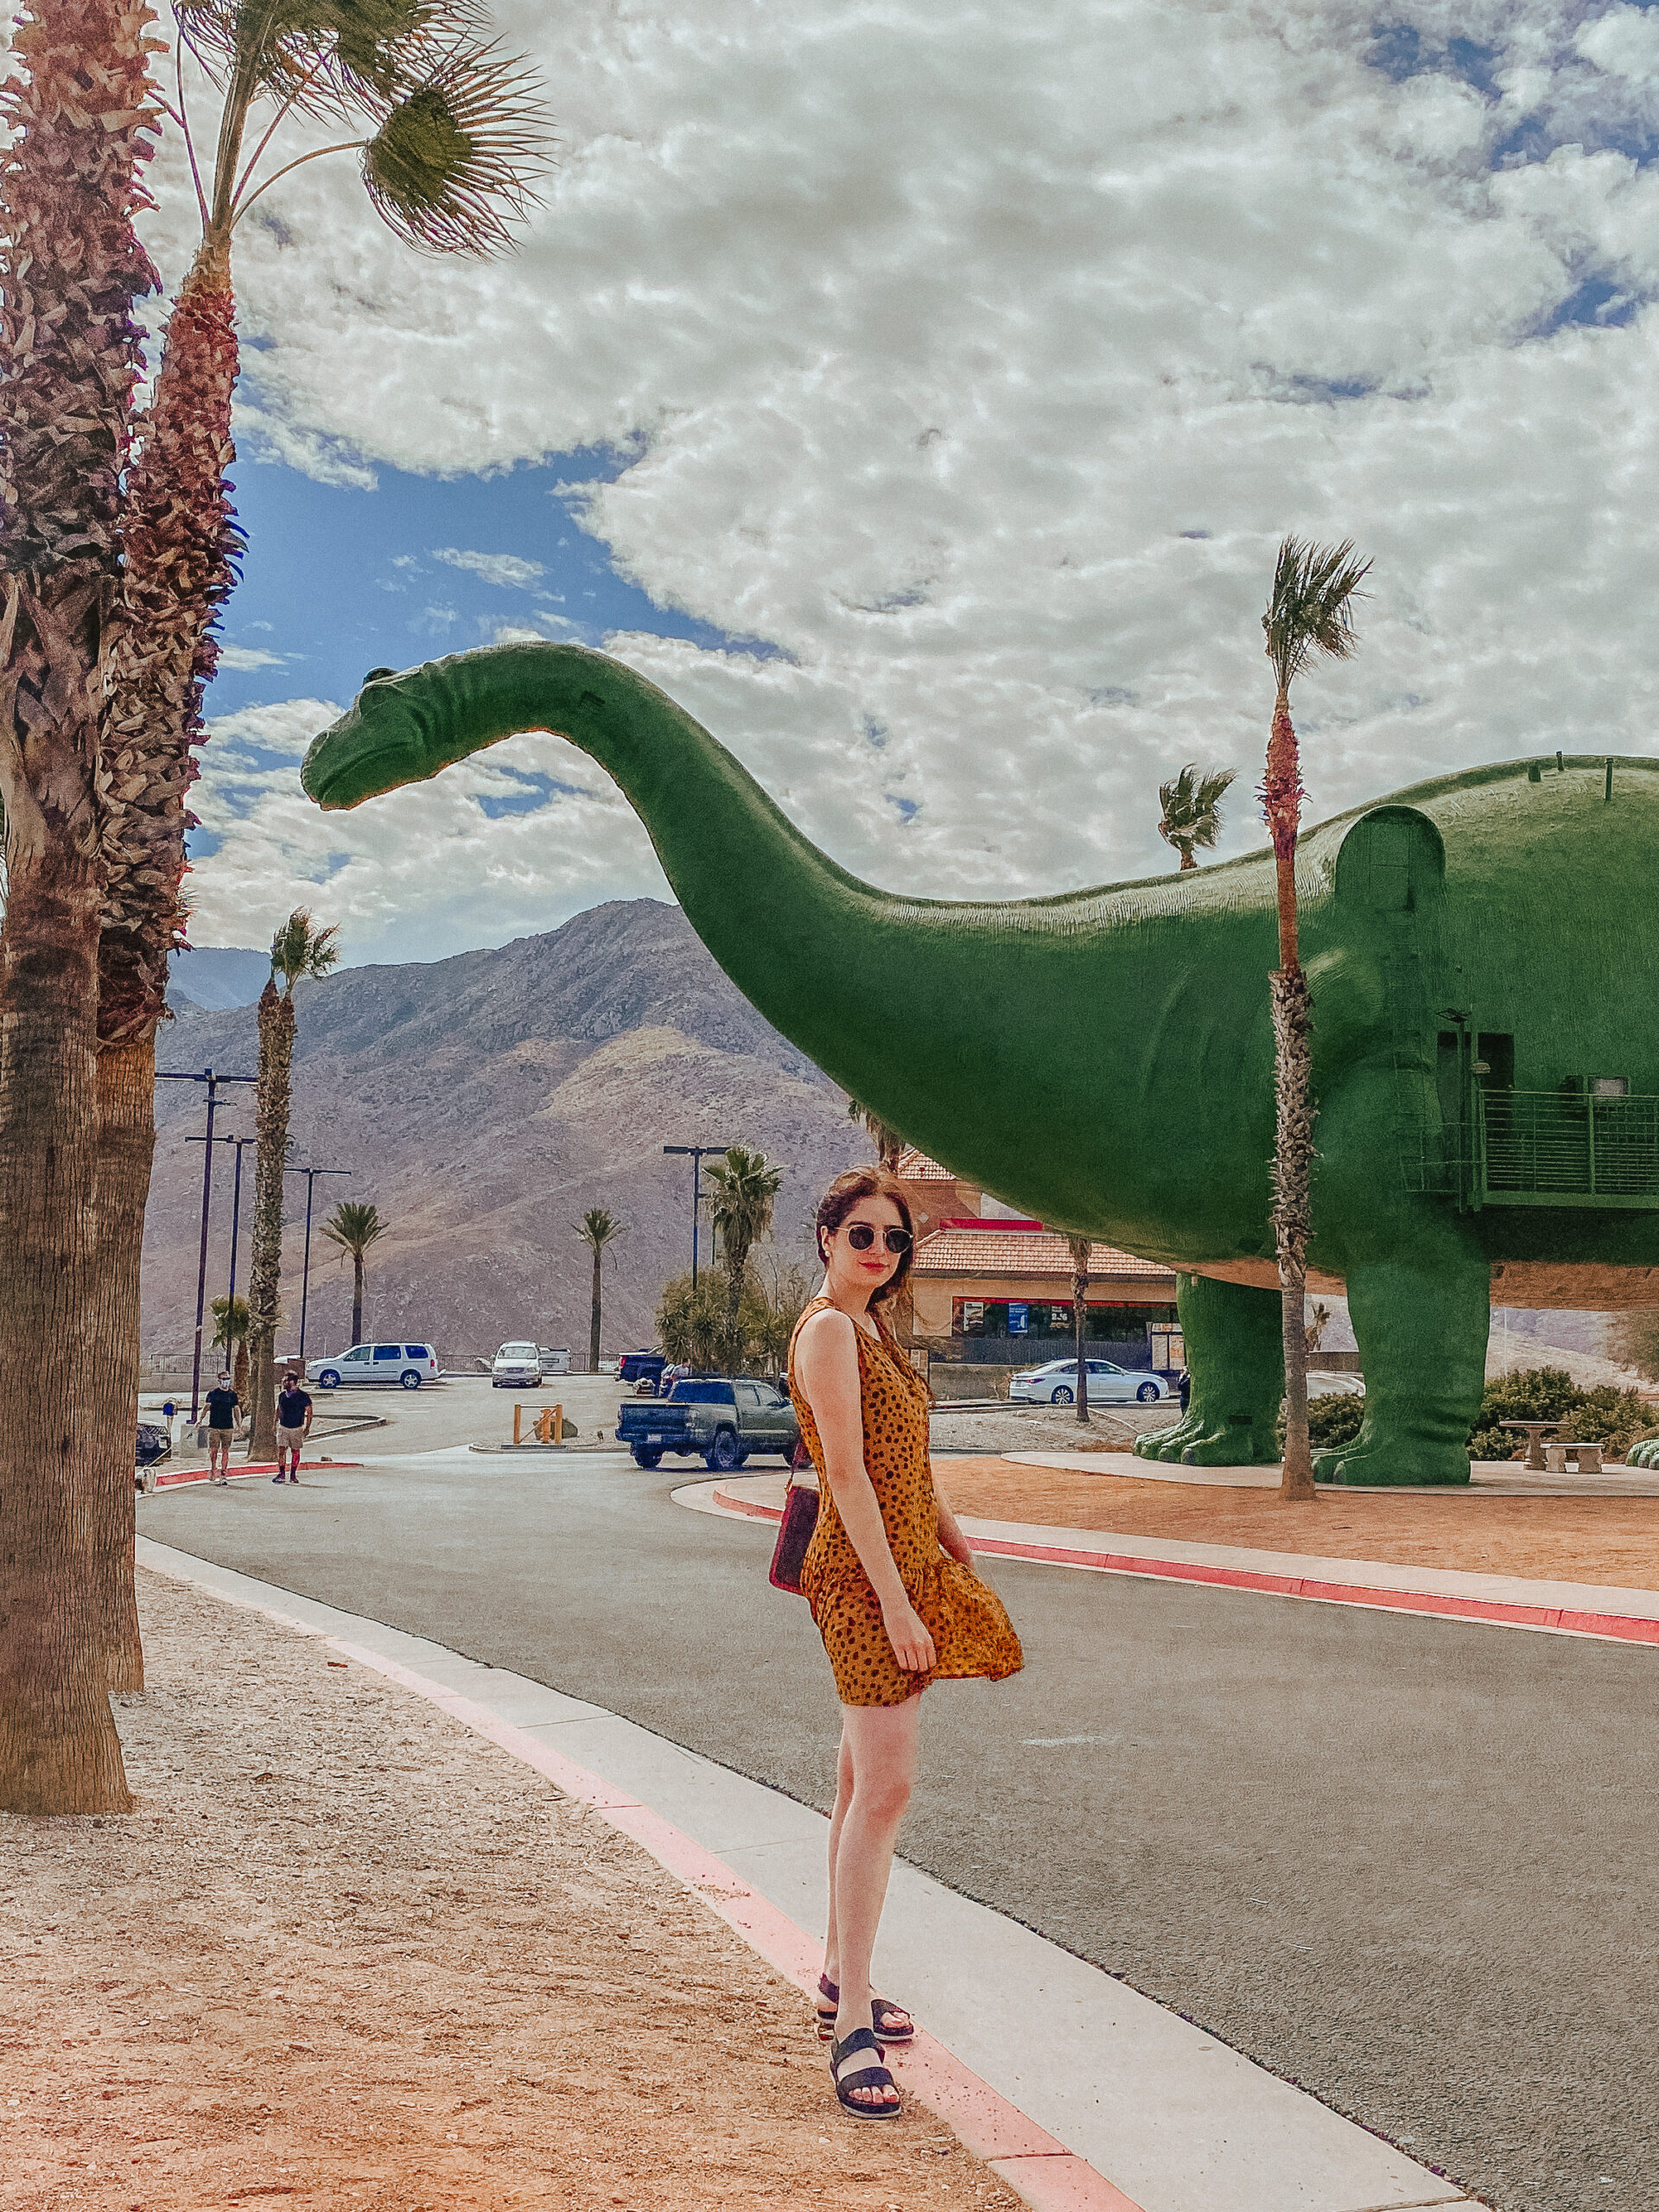 10 Most Instagrammable Places in Joshua Tree, California